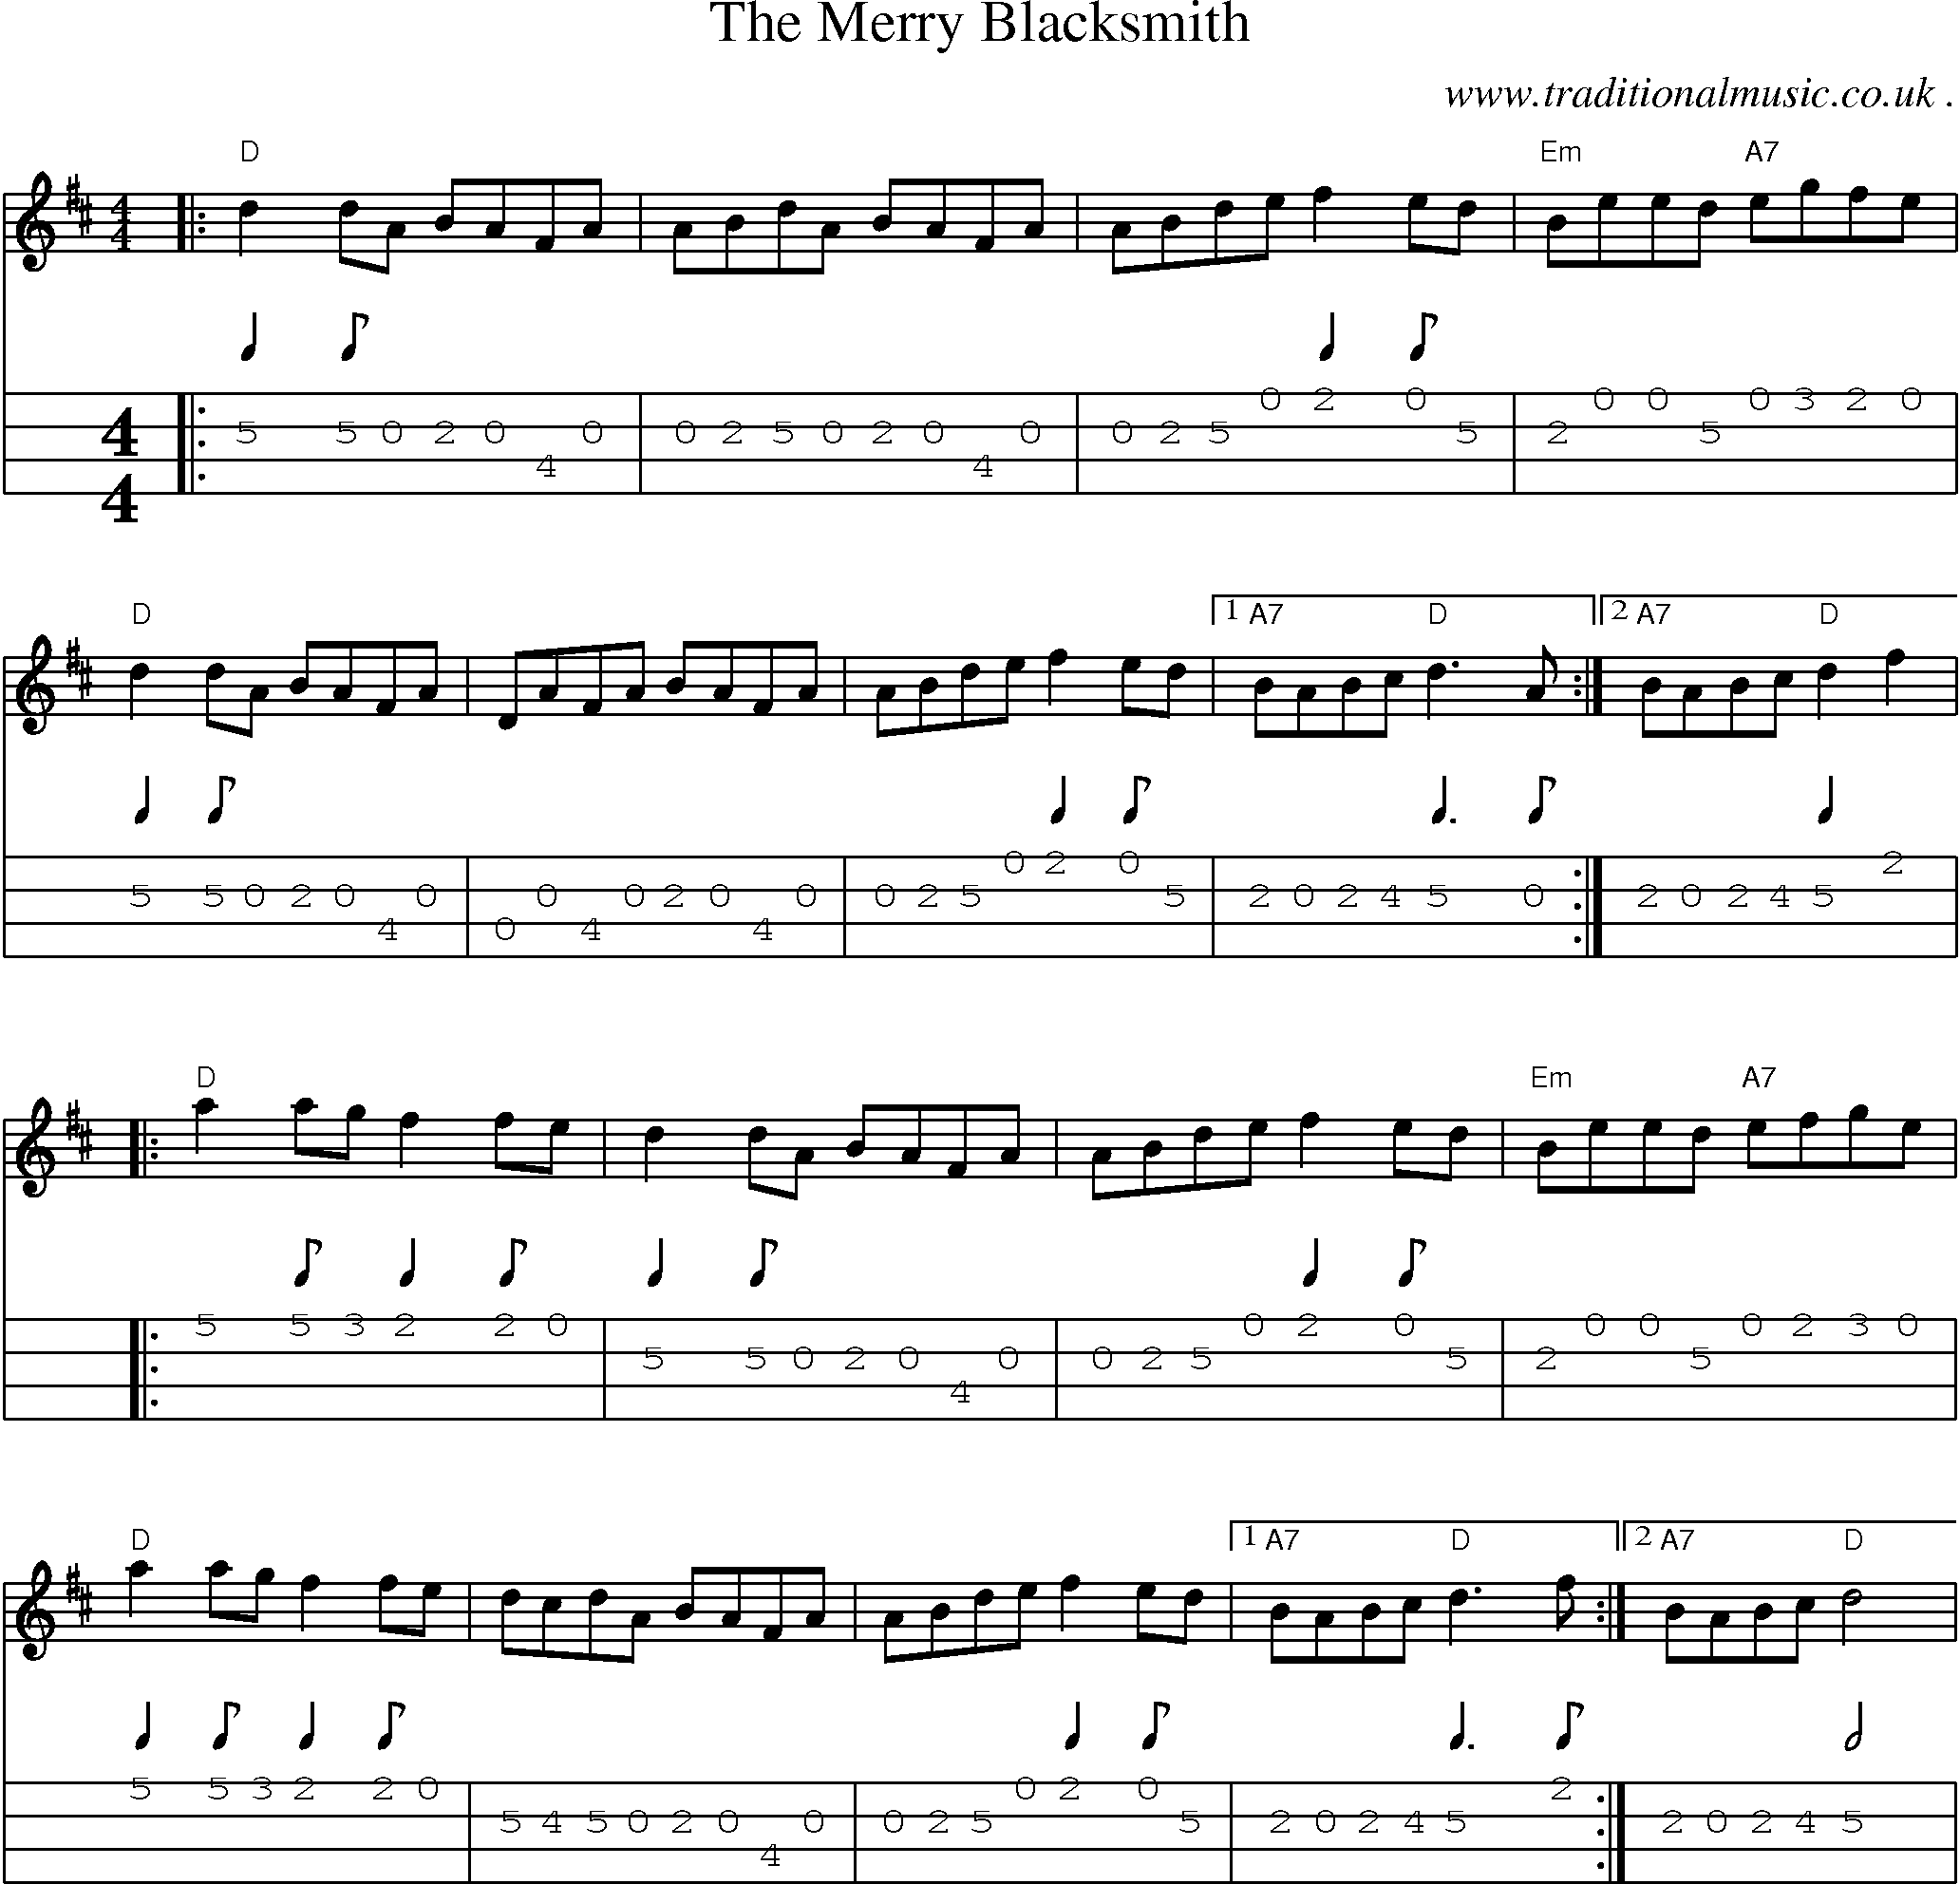 Music Score and Guitar Tabs for The Merry Blacksmith